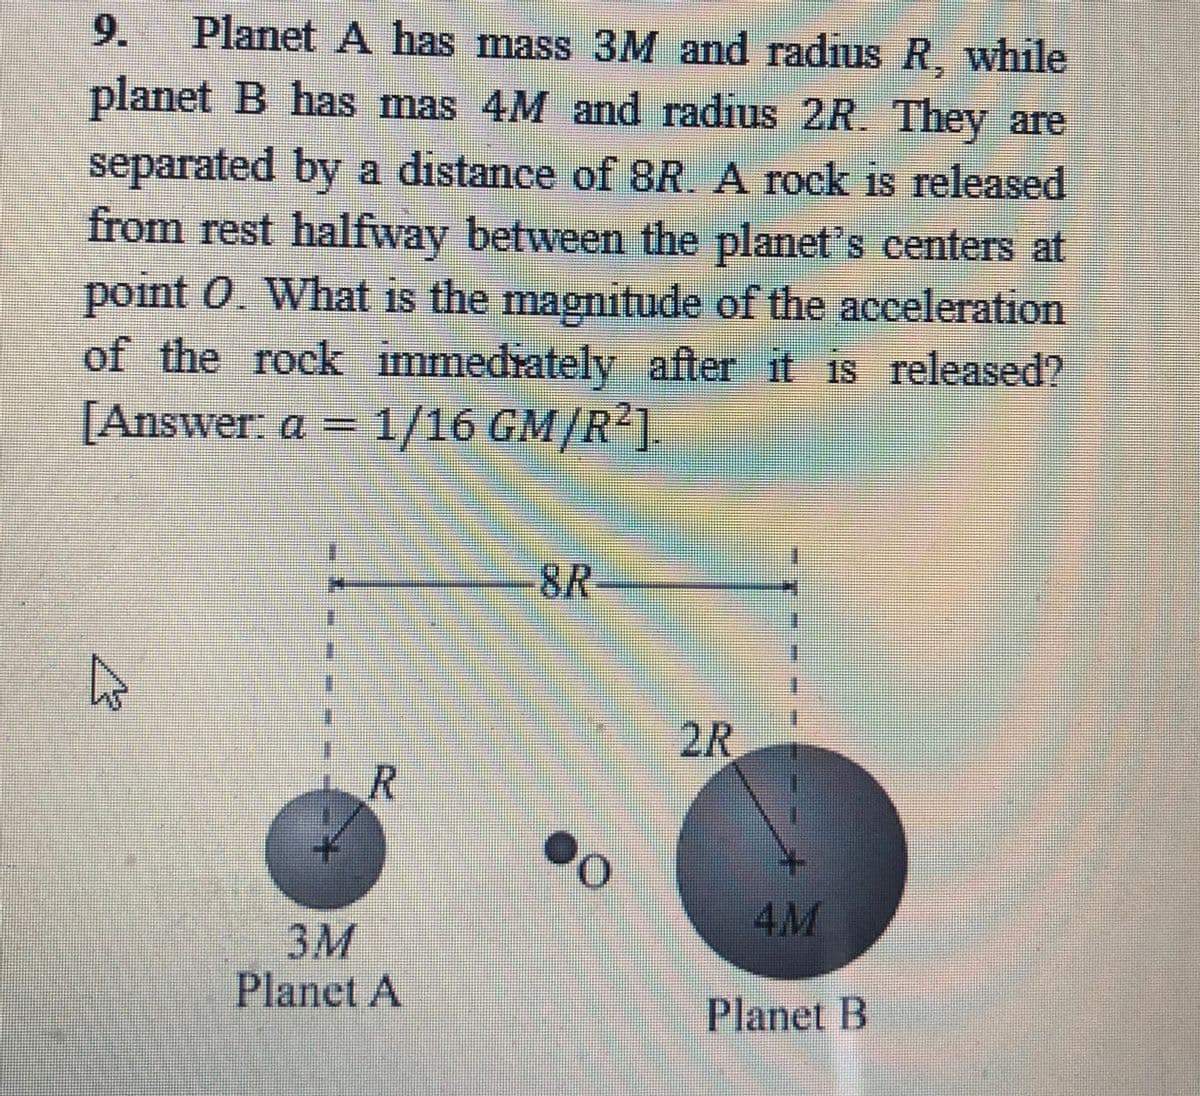 9.
Planet A has mass 3M and radius R, while
planet B has mas 4M and radius 2R They are
separated by a distance of 8R. A rock is released
from rest halfway between the planet's centers at
point 0. What is the magnitude of the acceleration
of the rock immedrately after it is released?
[Answer: a =1/16 GM/R1.
8R
2R
4M
3M
Planet A
Planet B
R.
